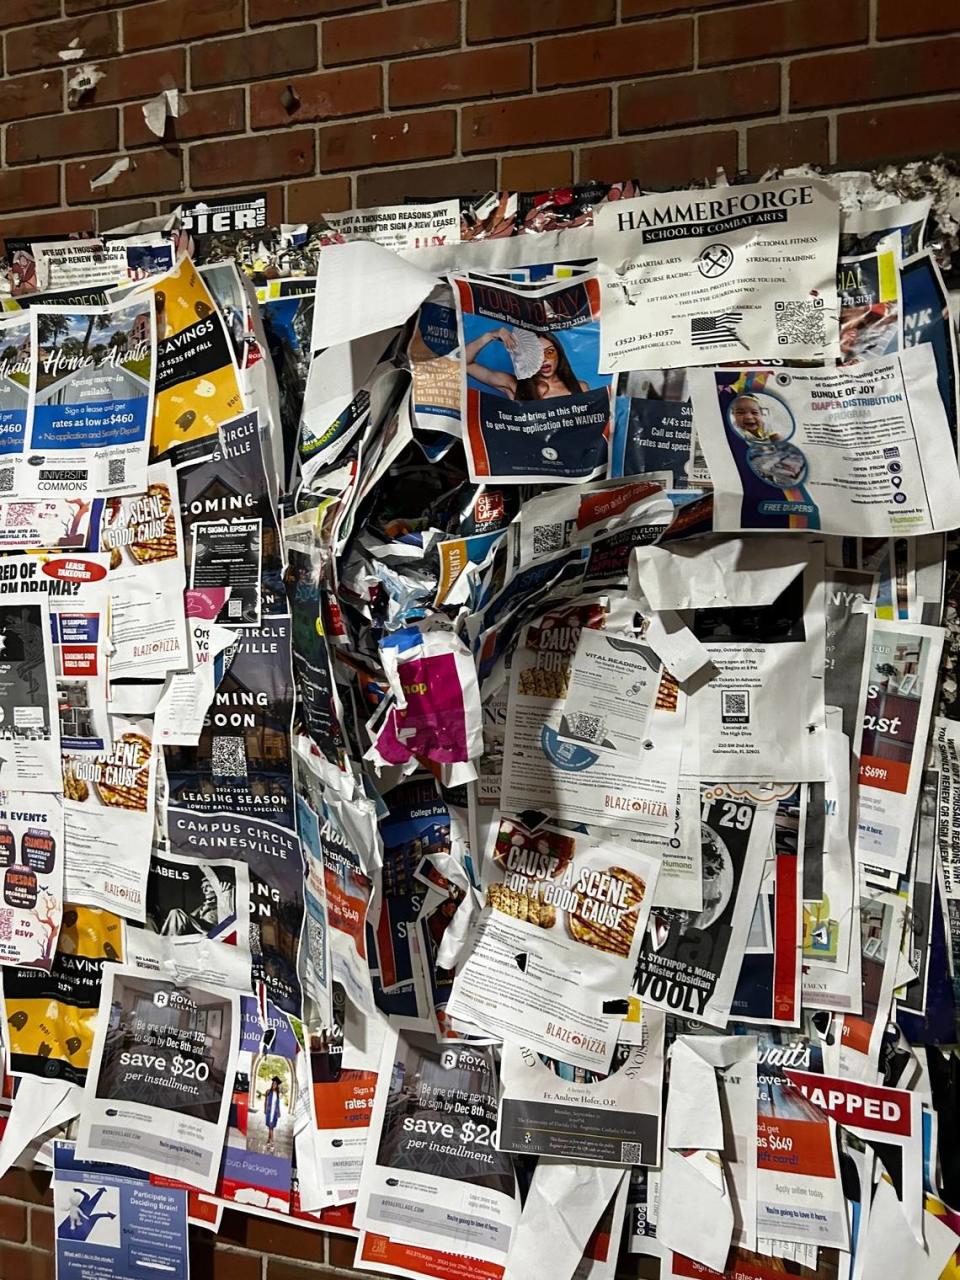 This is the bulletin board at the the University of Florida in Gainesville where “Kidnapped” posters of hostages taken by Hamas during the Oct. 7 attack were torn down.